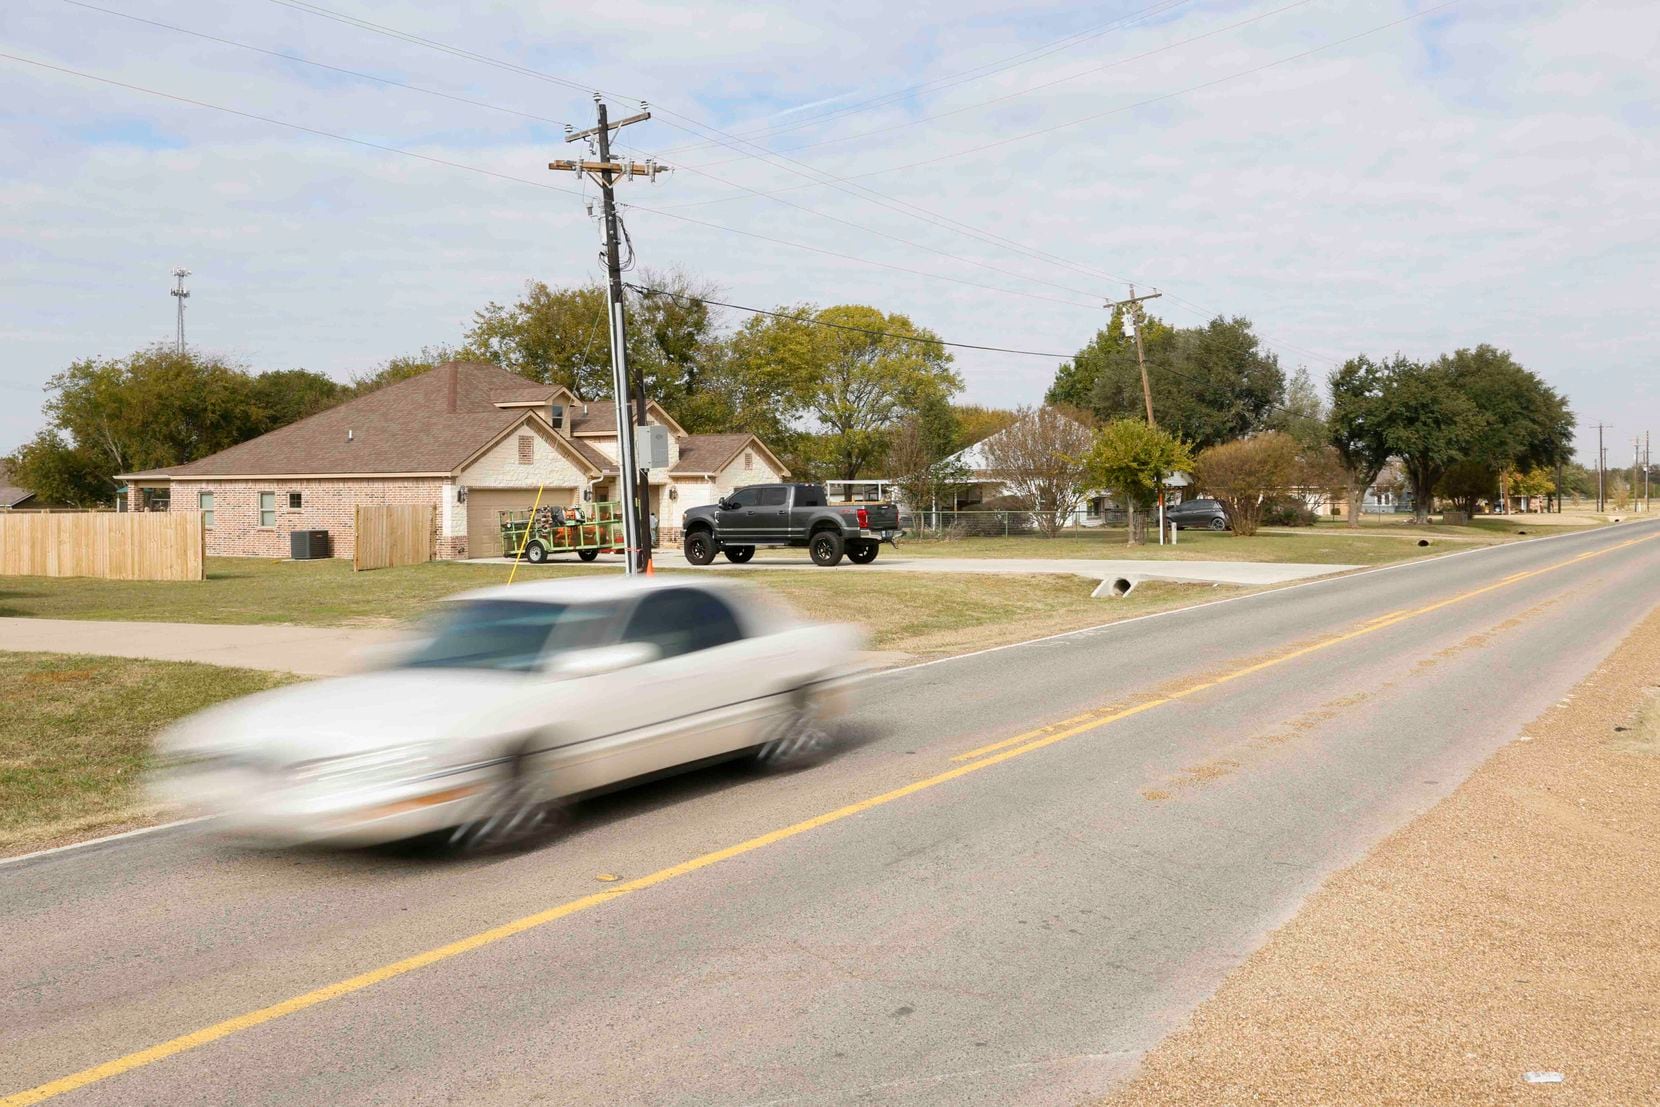 Traffic passes by a housing development along FM 3080 in Mabank.